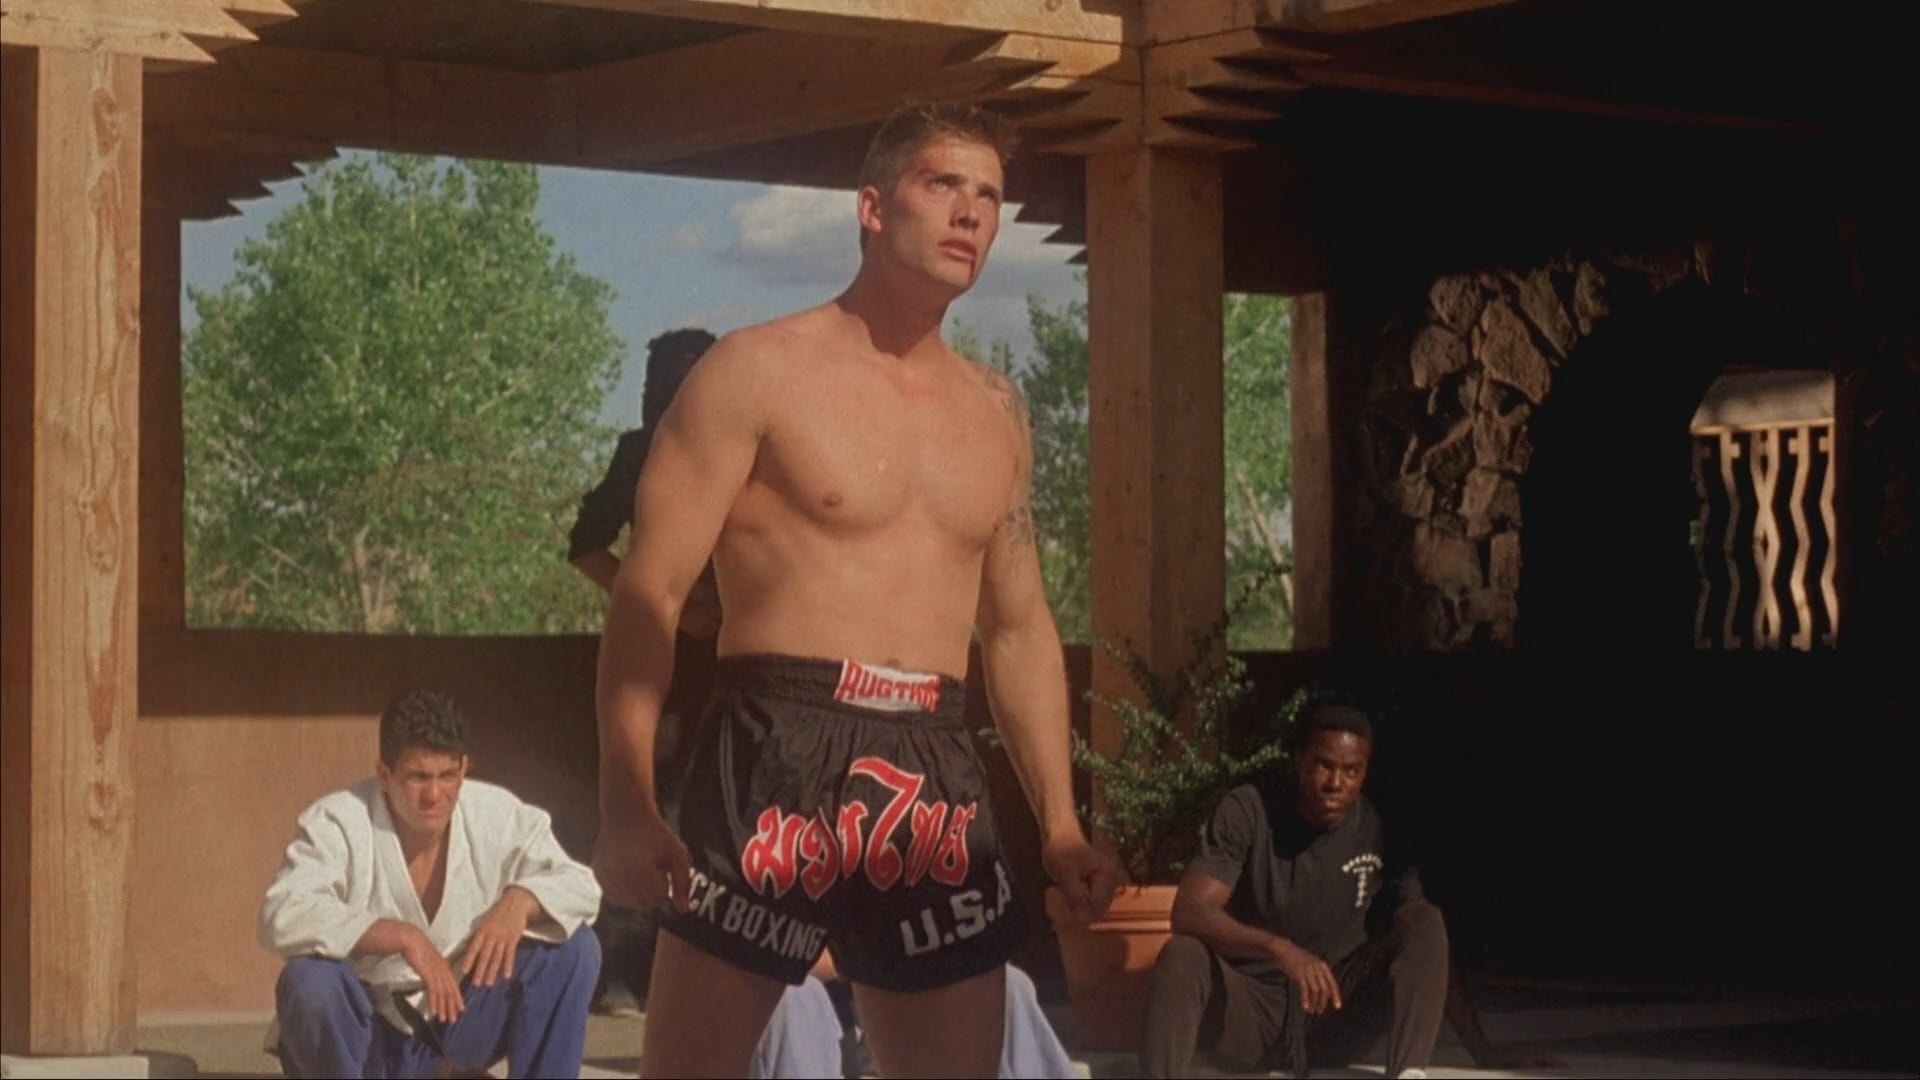 Kickboxer (Movie): The Aggressor, A 1994 direct-to-video martial arts film directed by Albert Pyun. 1920x1080 Full HD Background.